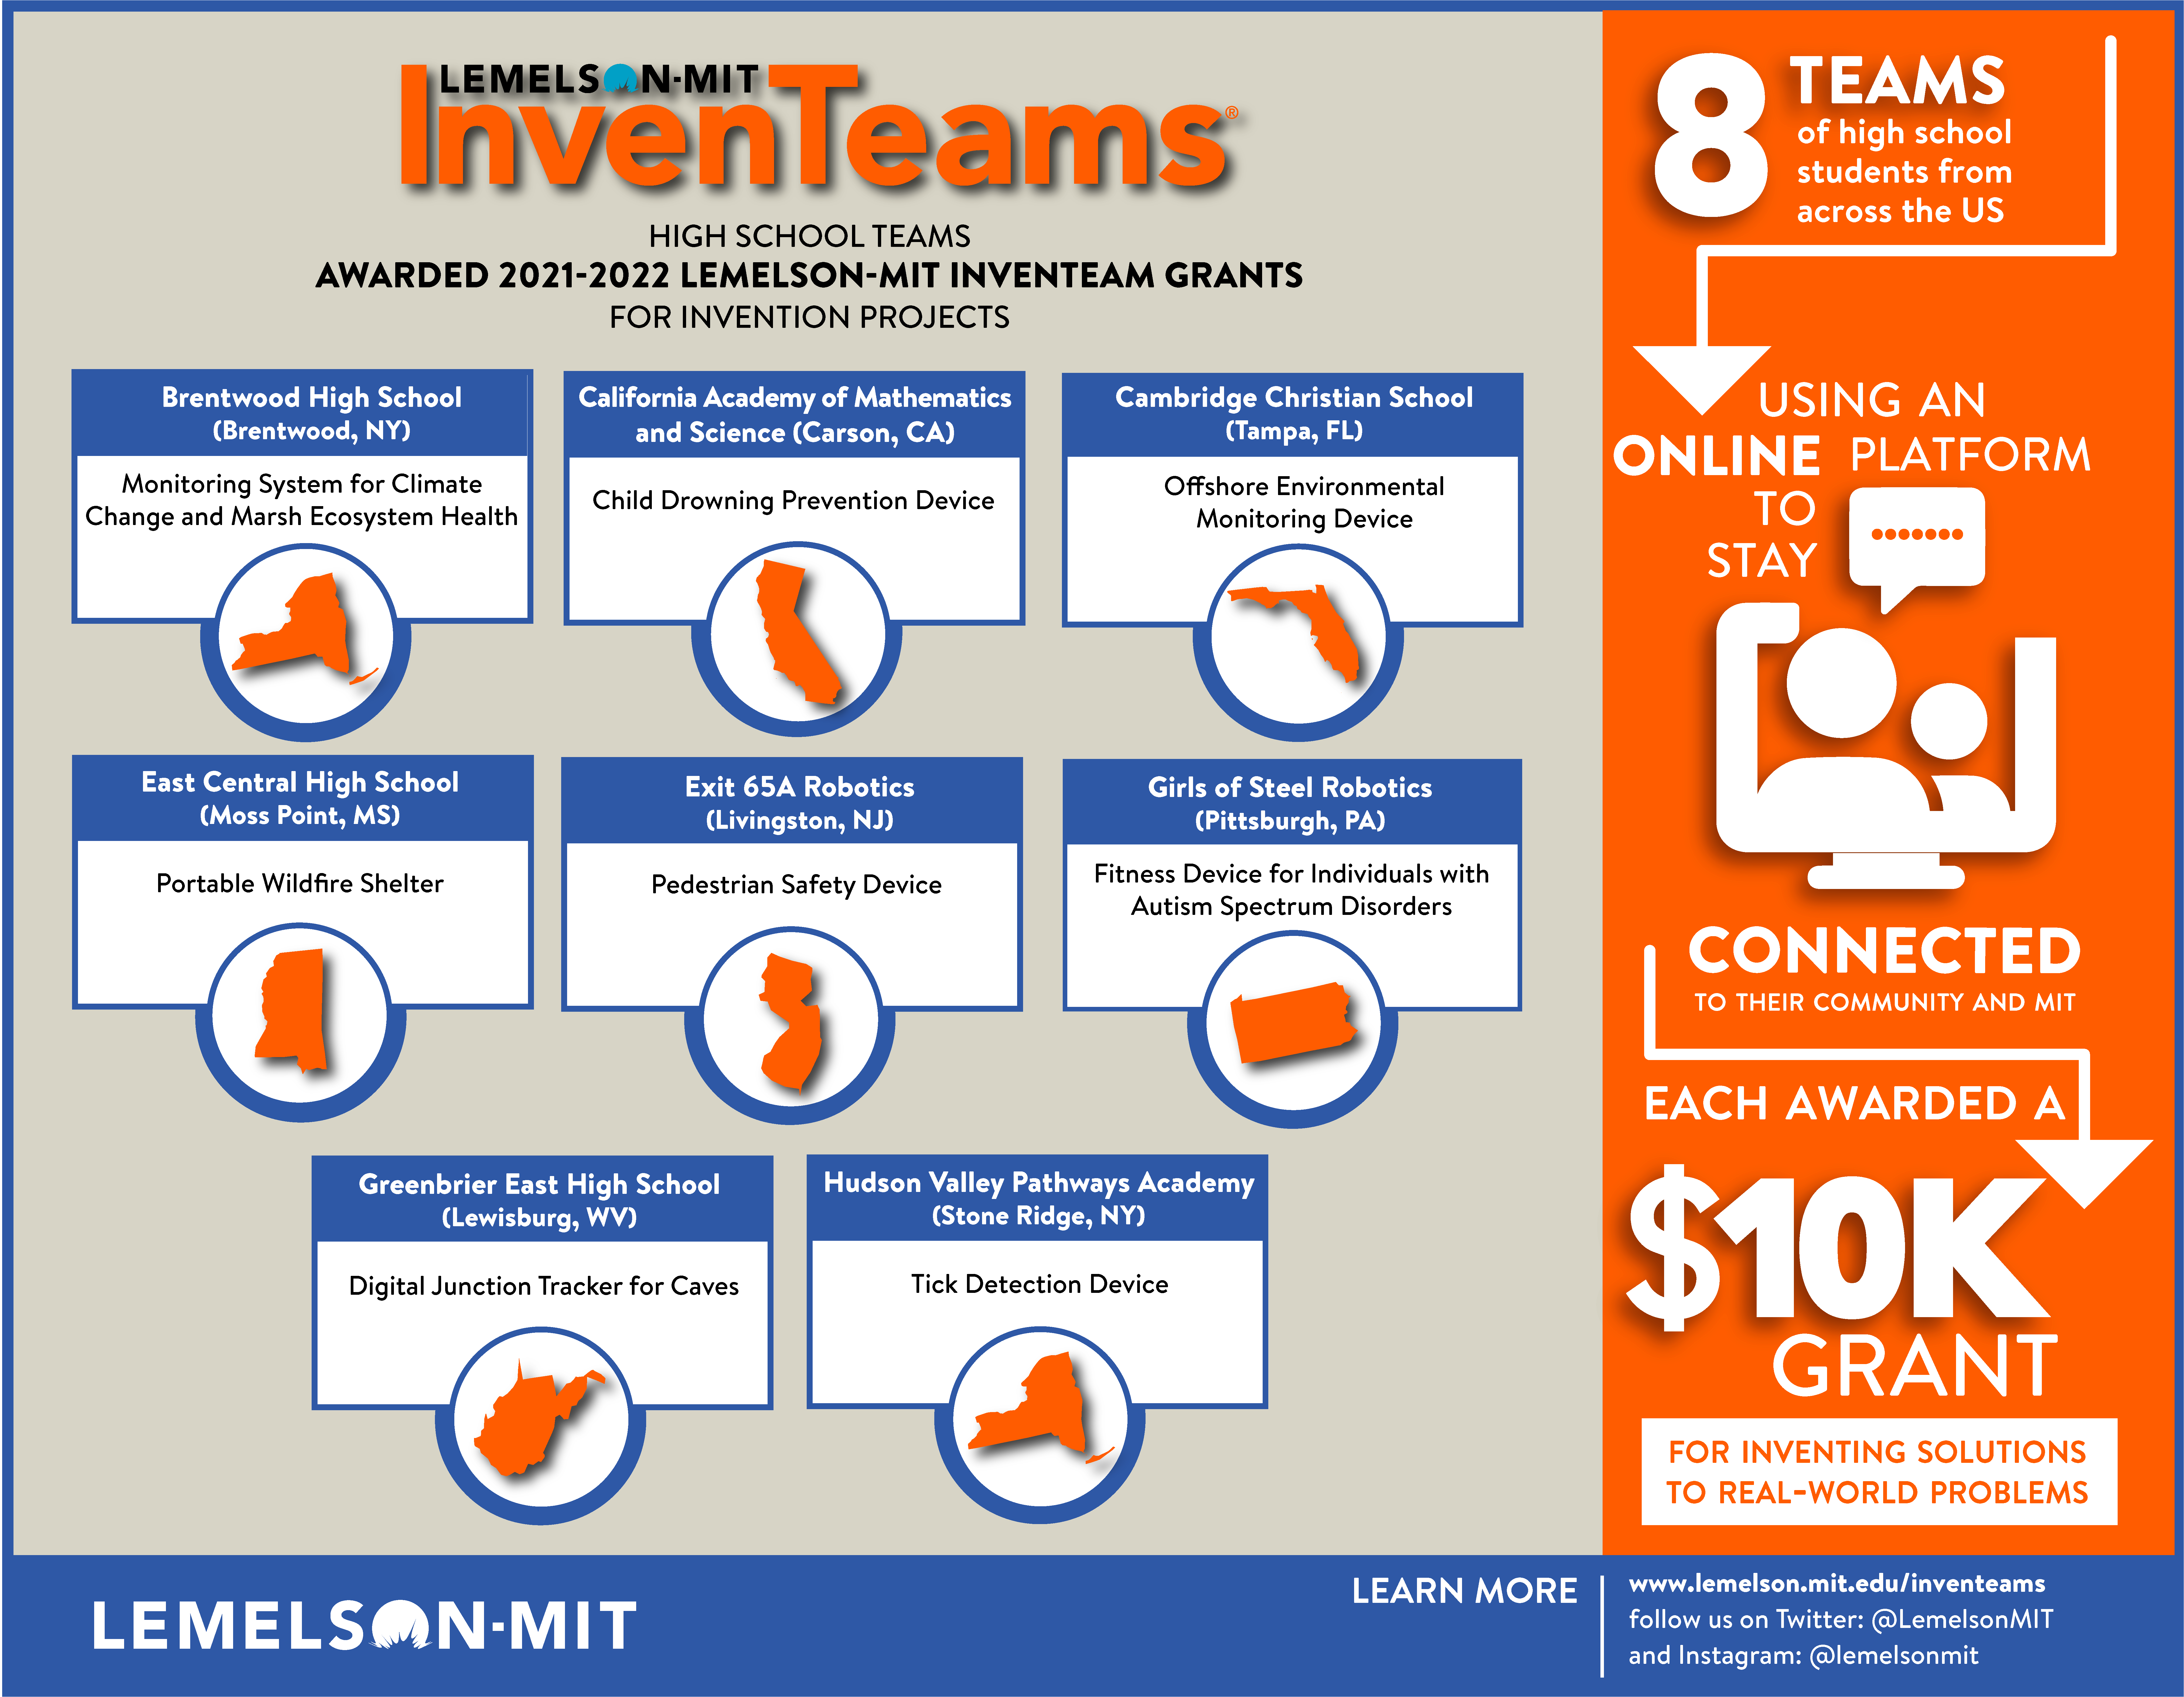 Infographic featuring the state outlines of the eight teams. The teams, their towns and inventions are listed above their state graphic. On the right, "8 teams of high school students from across the US, using an online platform to stay connected to their community and MIT, each awarded a $10k grant for inventing solutions to real-world problems."